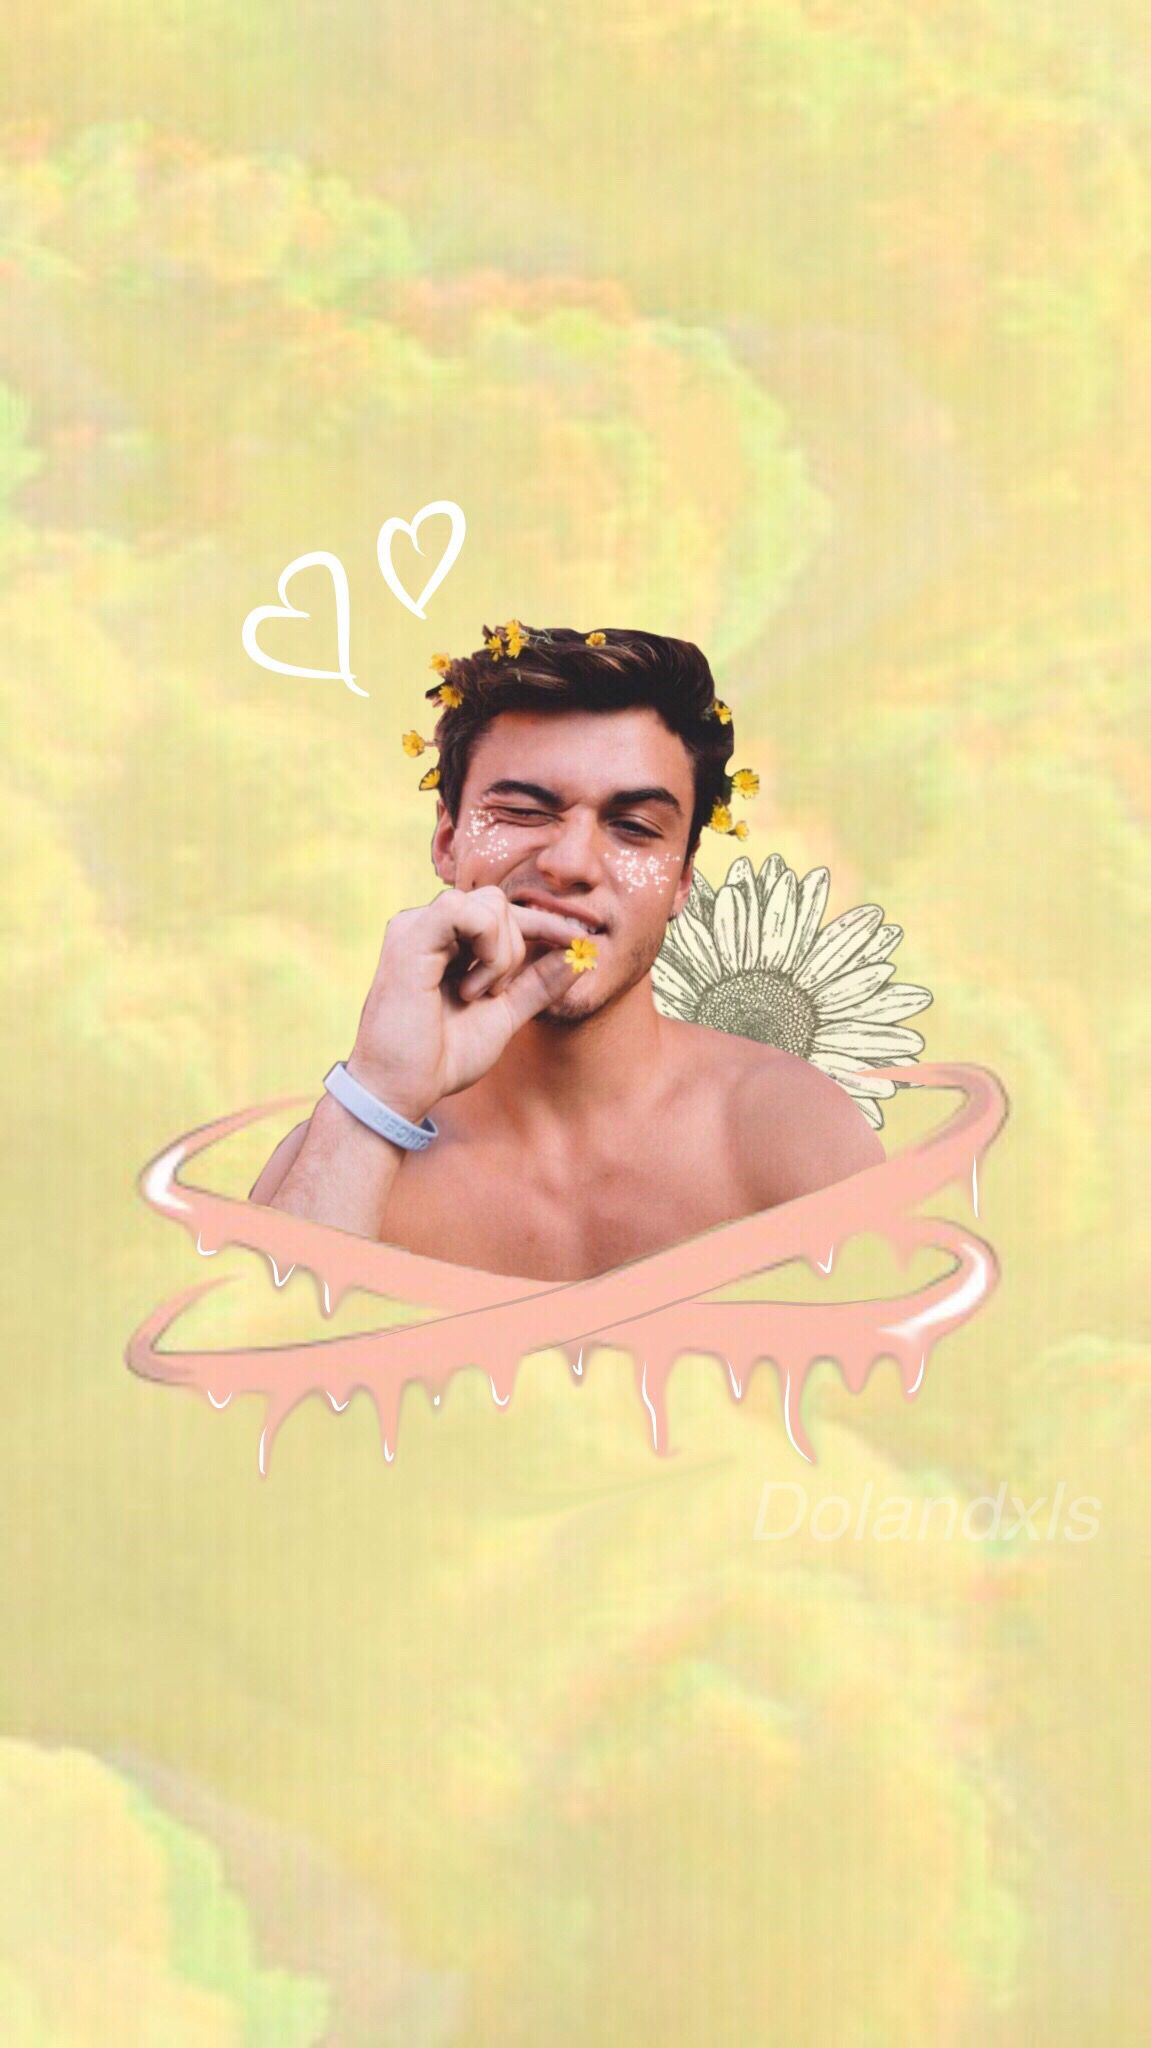 Aesthetic Wallpaper For Iphone Of Grayson Dolan - HD Wallpaper 